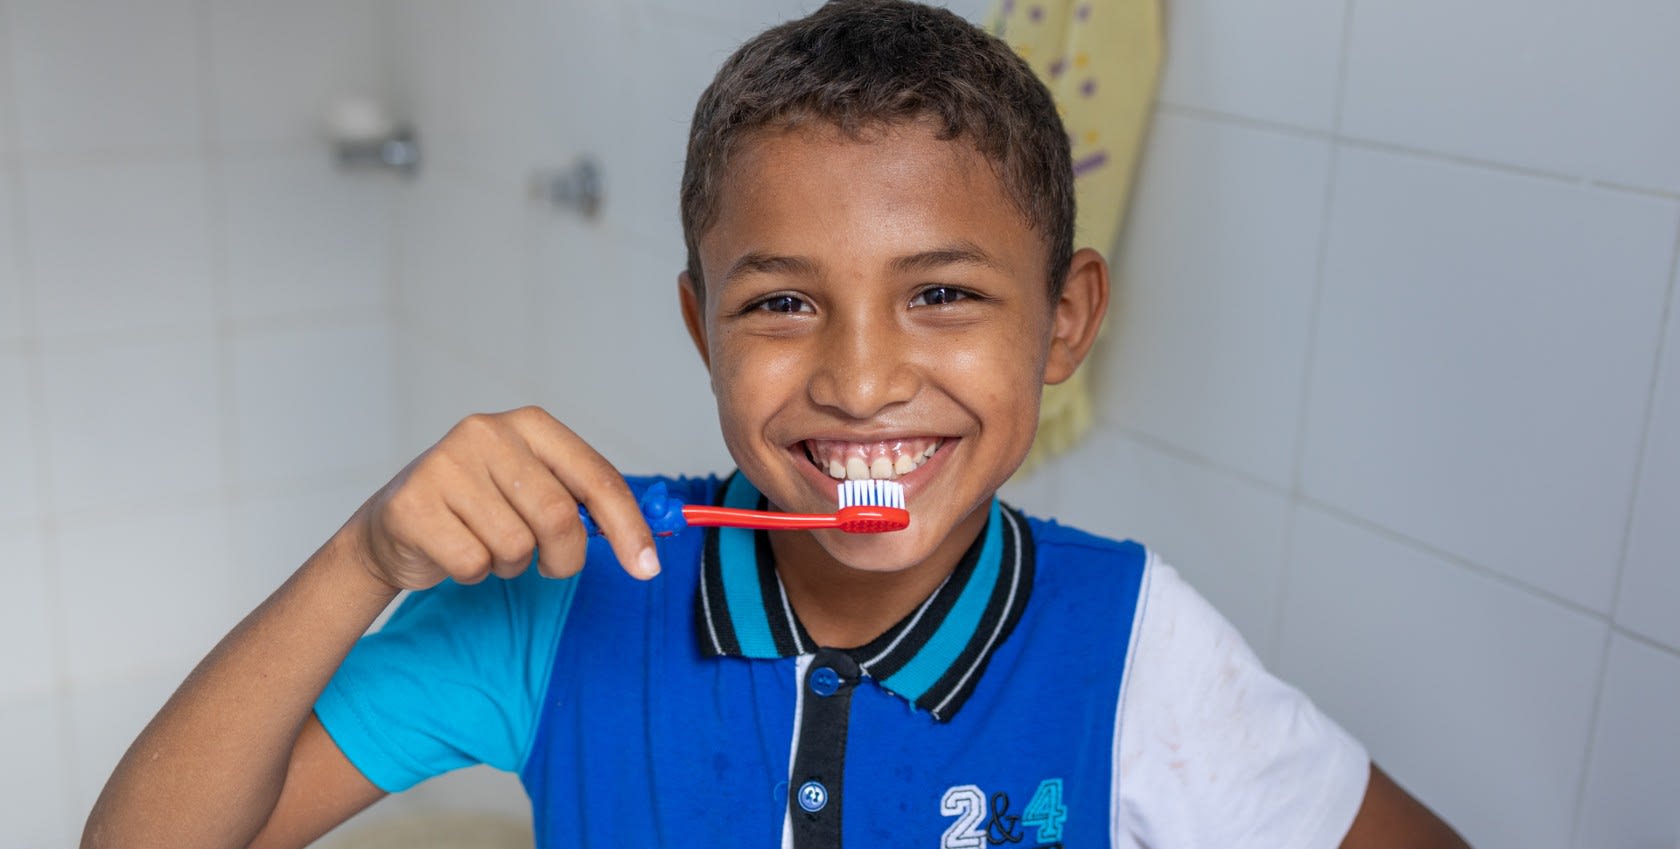 A boy holding tooth brush brushing his teeth with a smile on his face